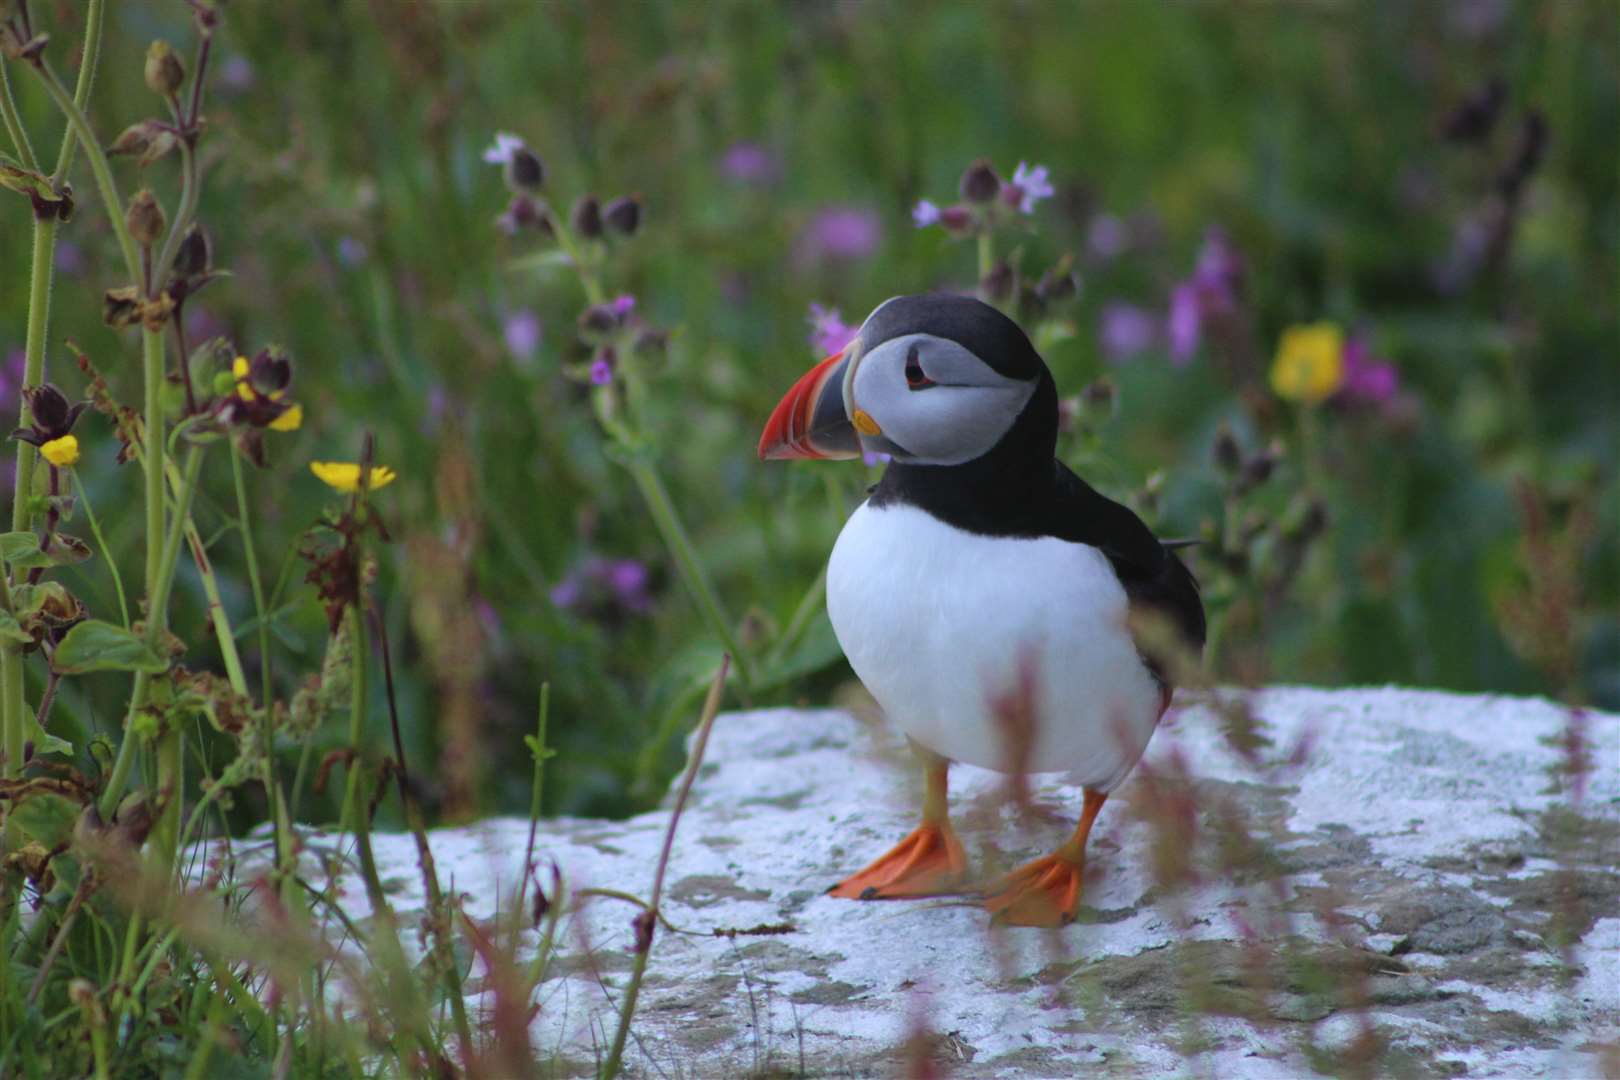 Edward Hancox snapped this puffin at Westray, Orkney.